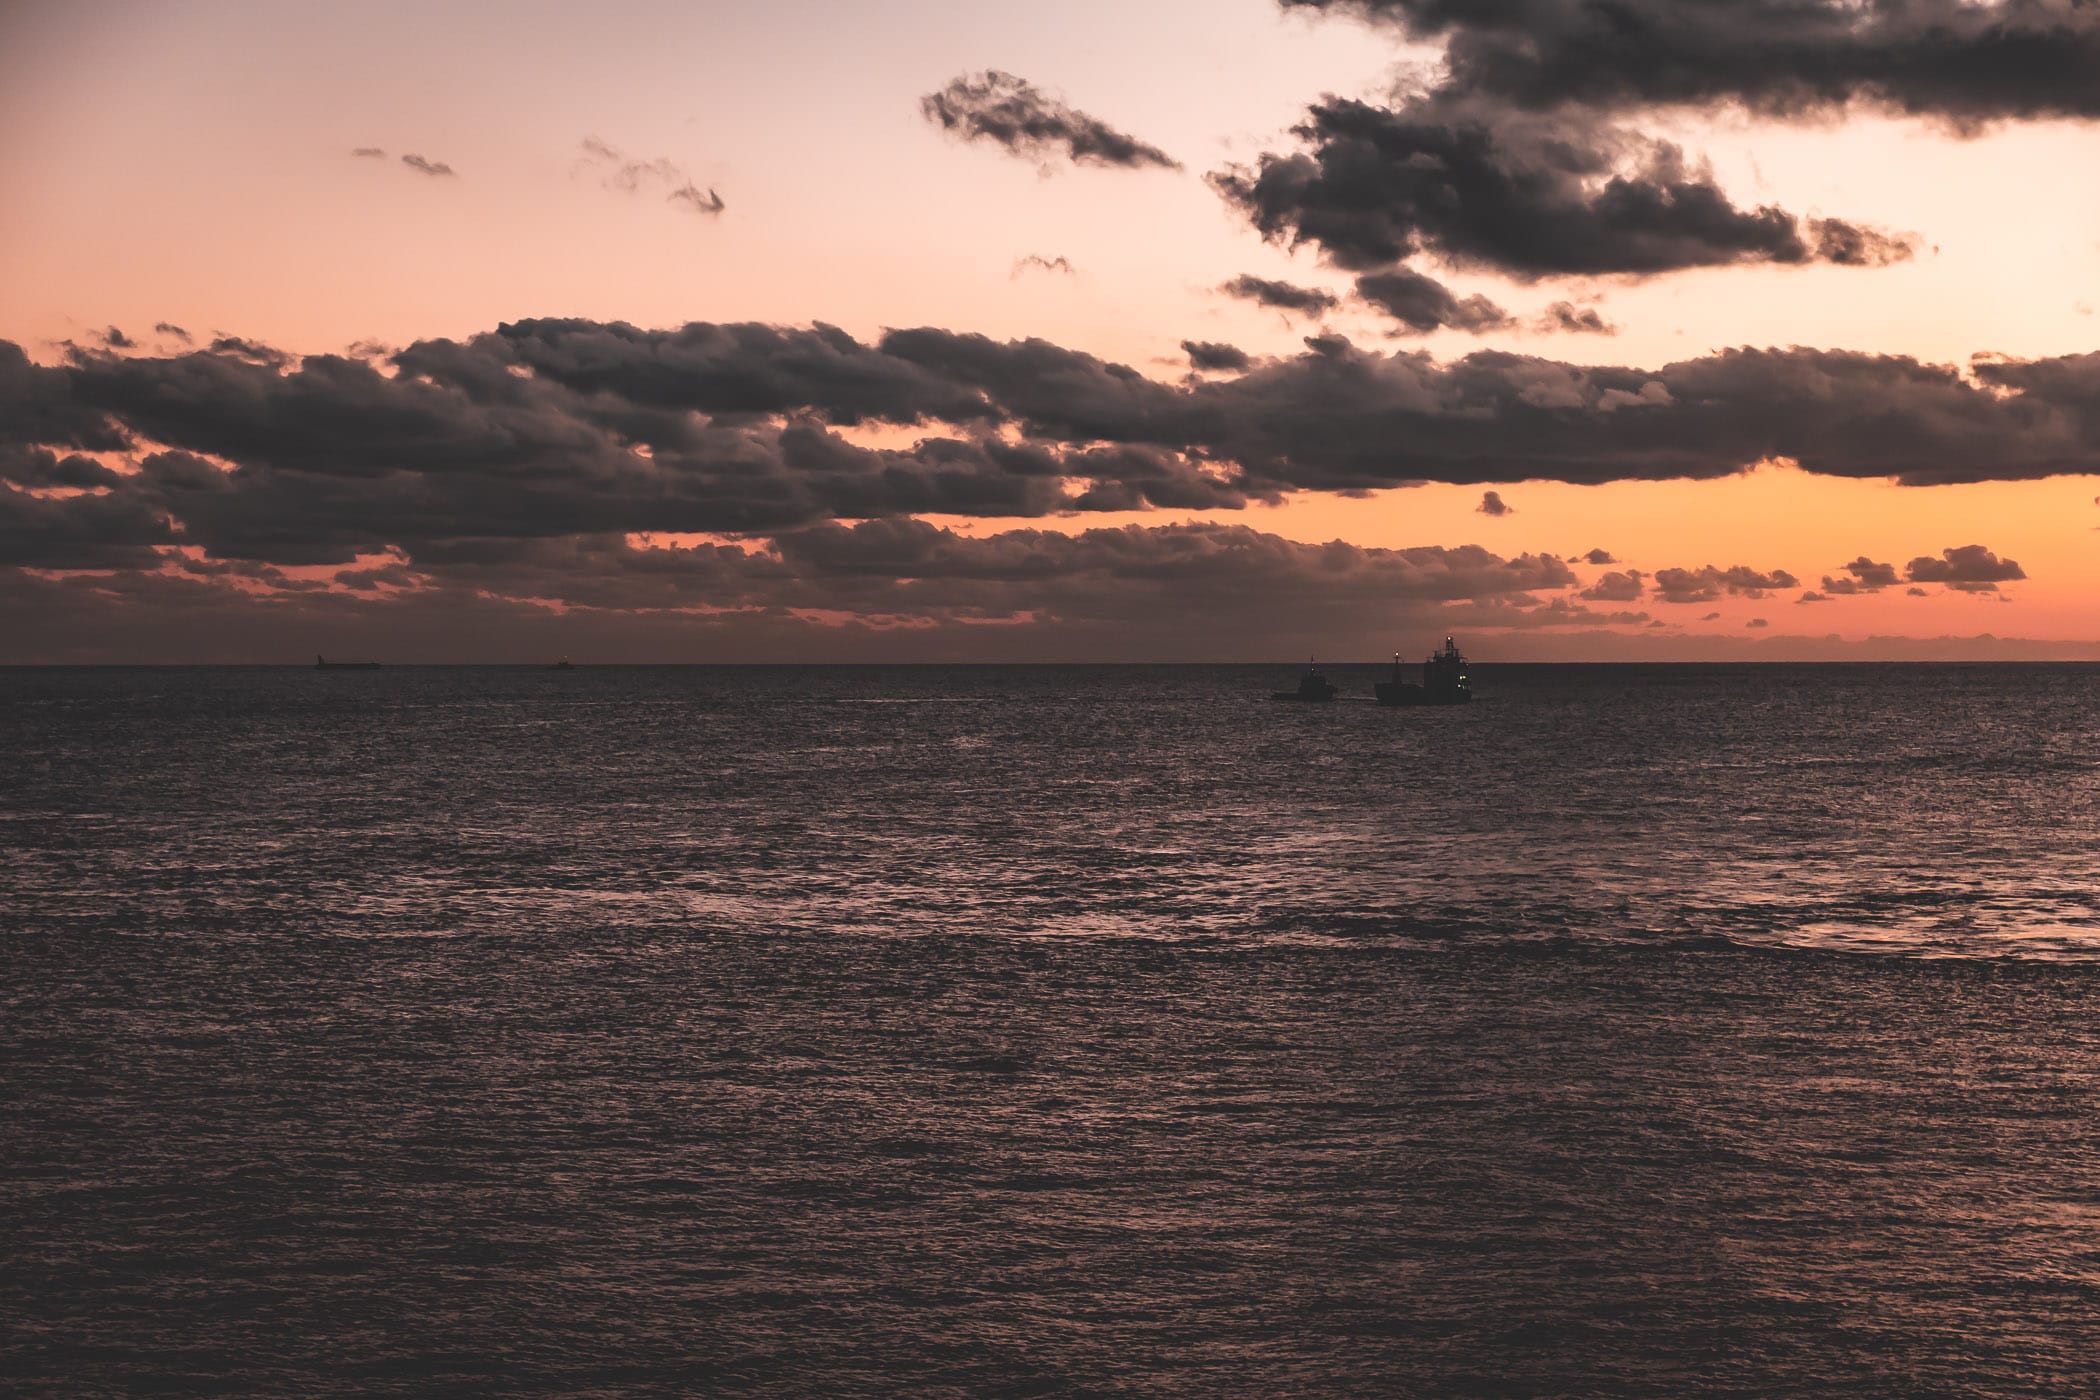 The sun sets on the Caribbean Sea off the coast of George Town, Grand Cayman.